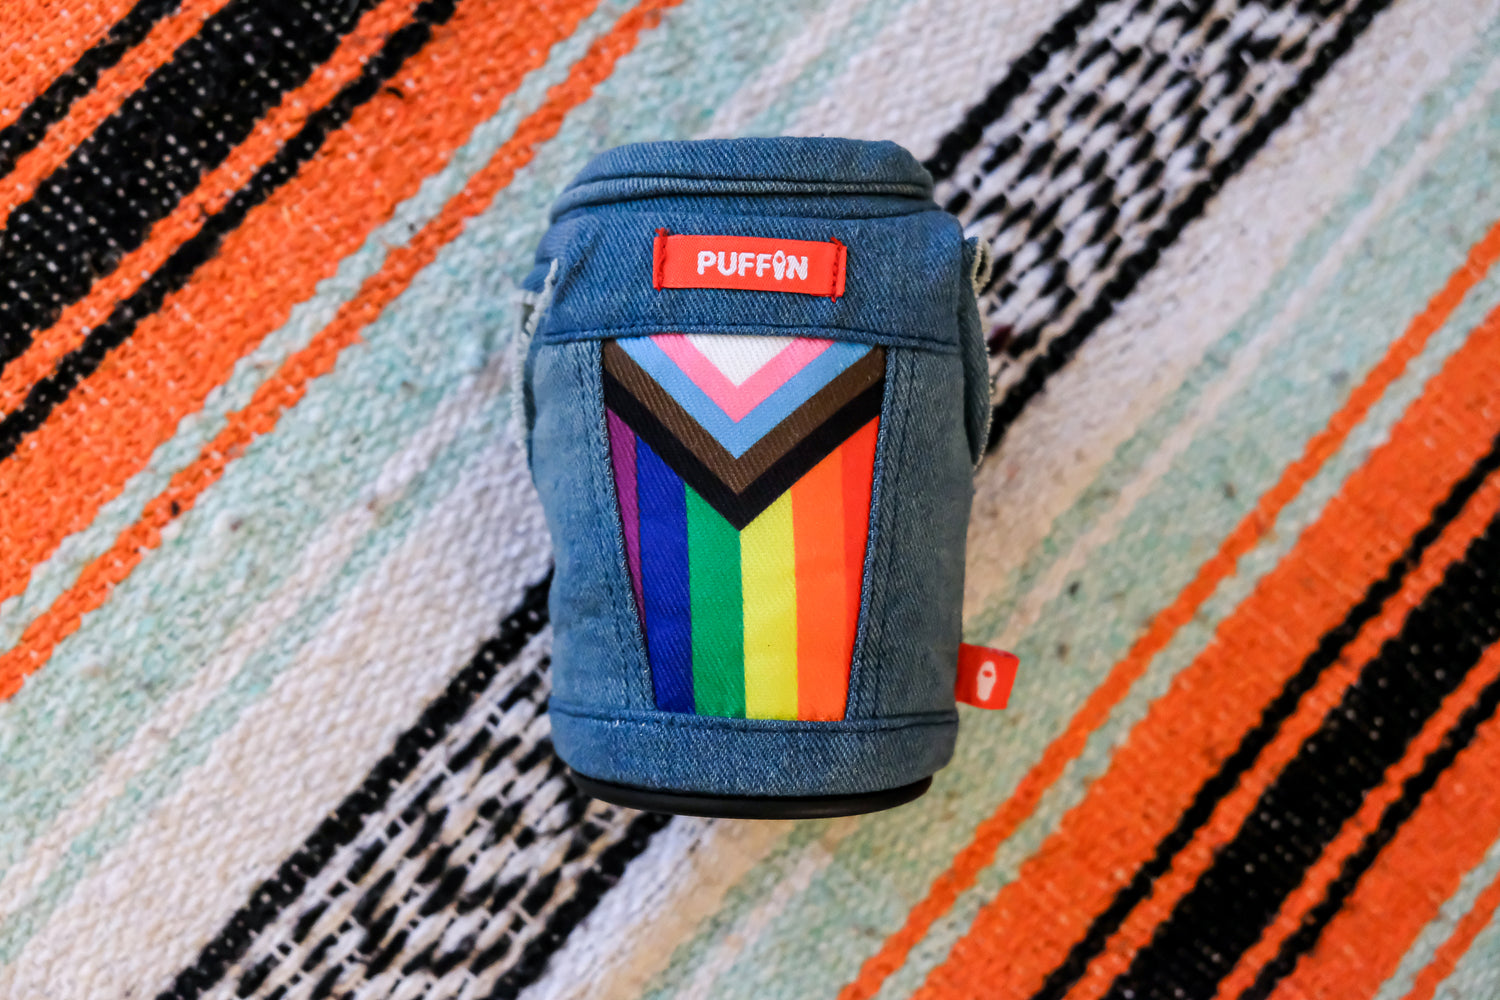 The Pride Vest - Puffin Drinkwear drink sleeves - laying on a colorful blanket